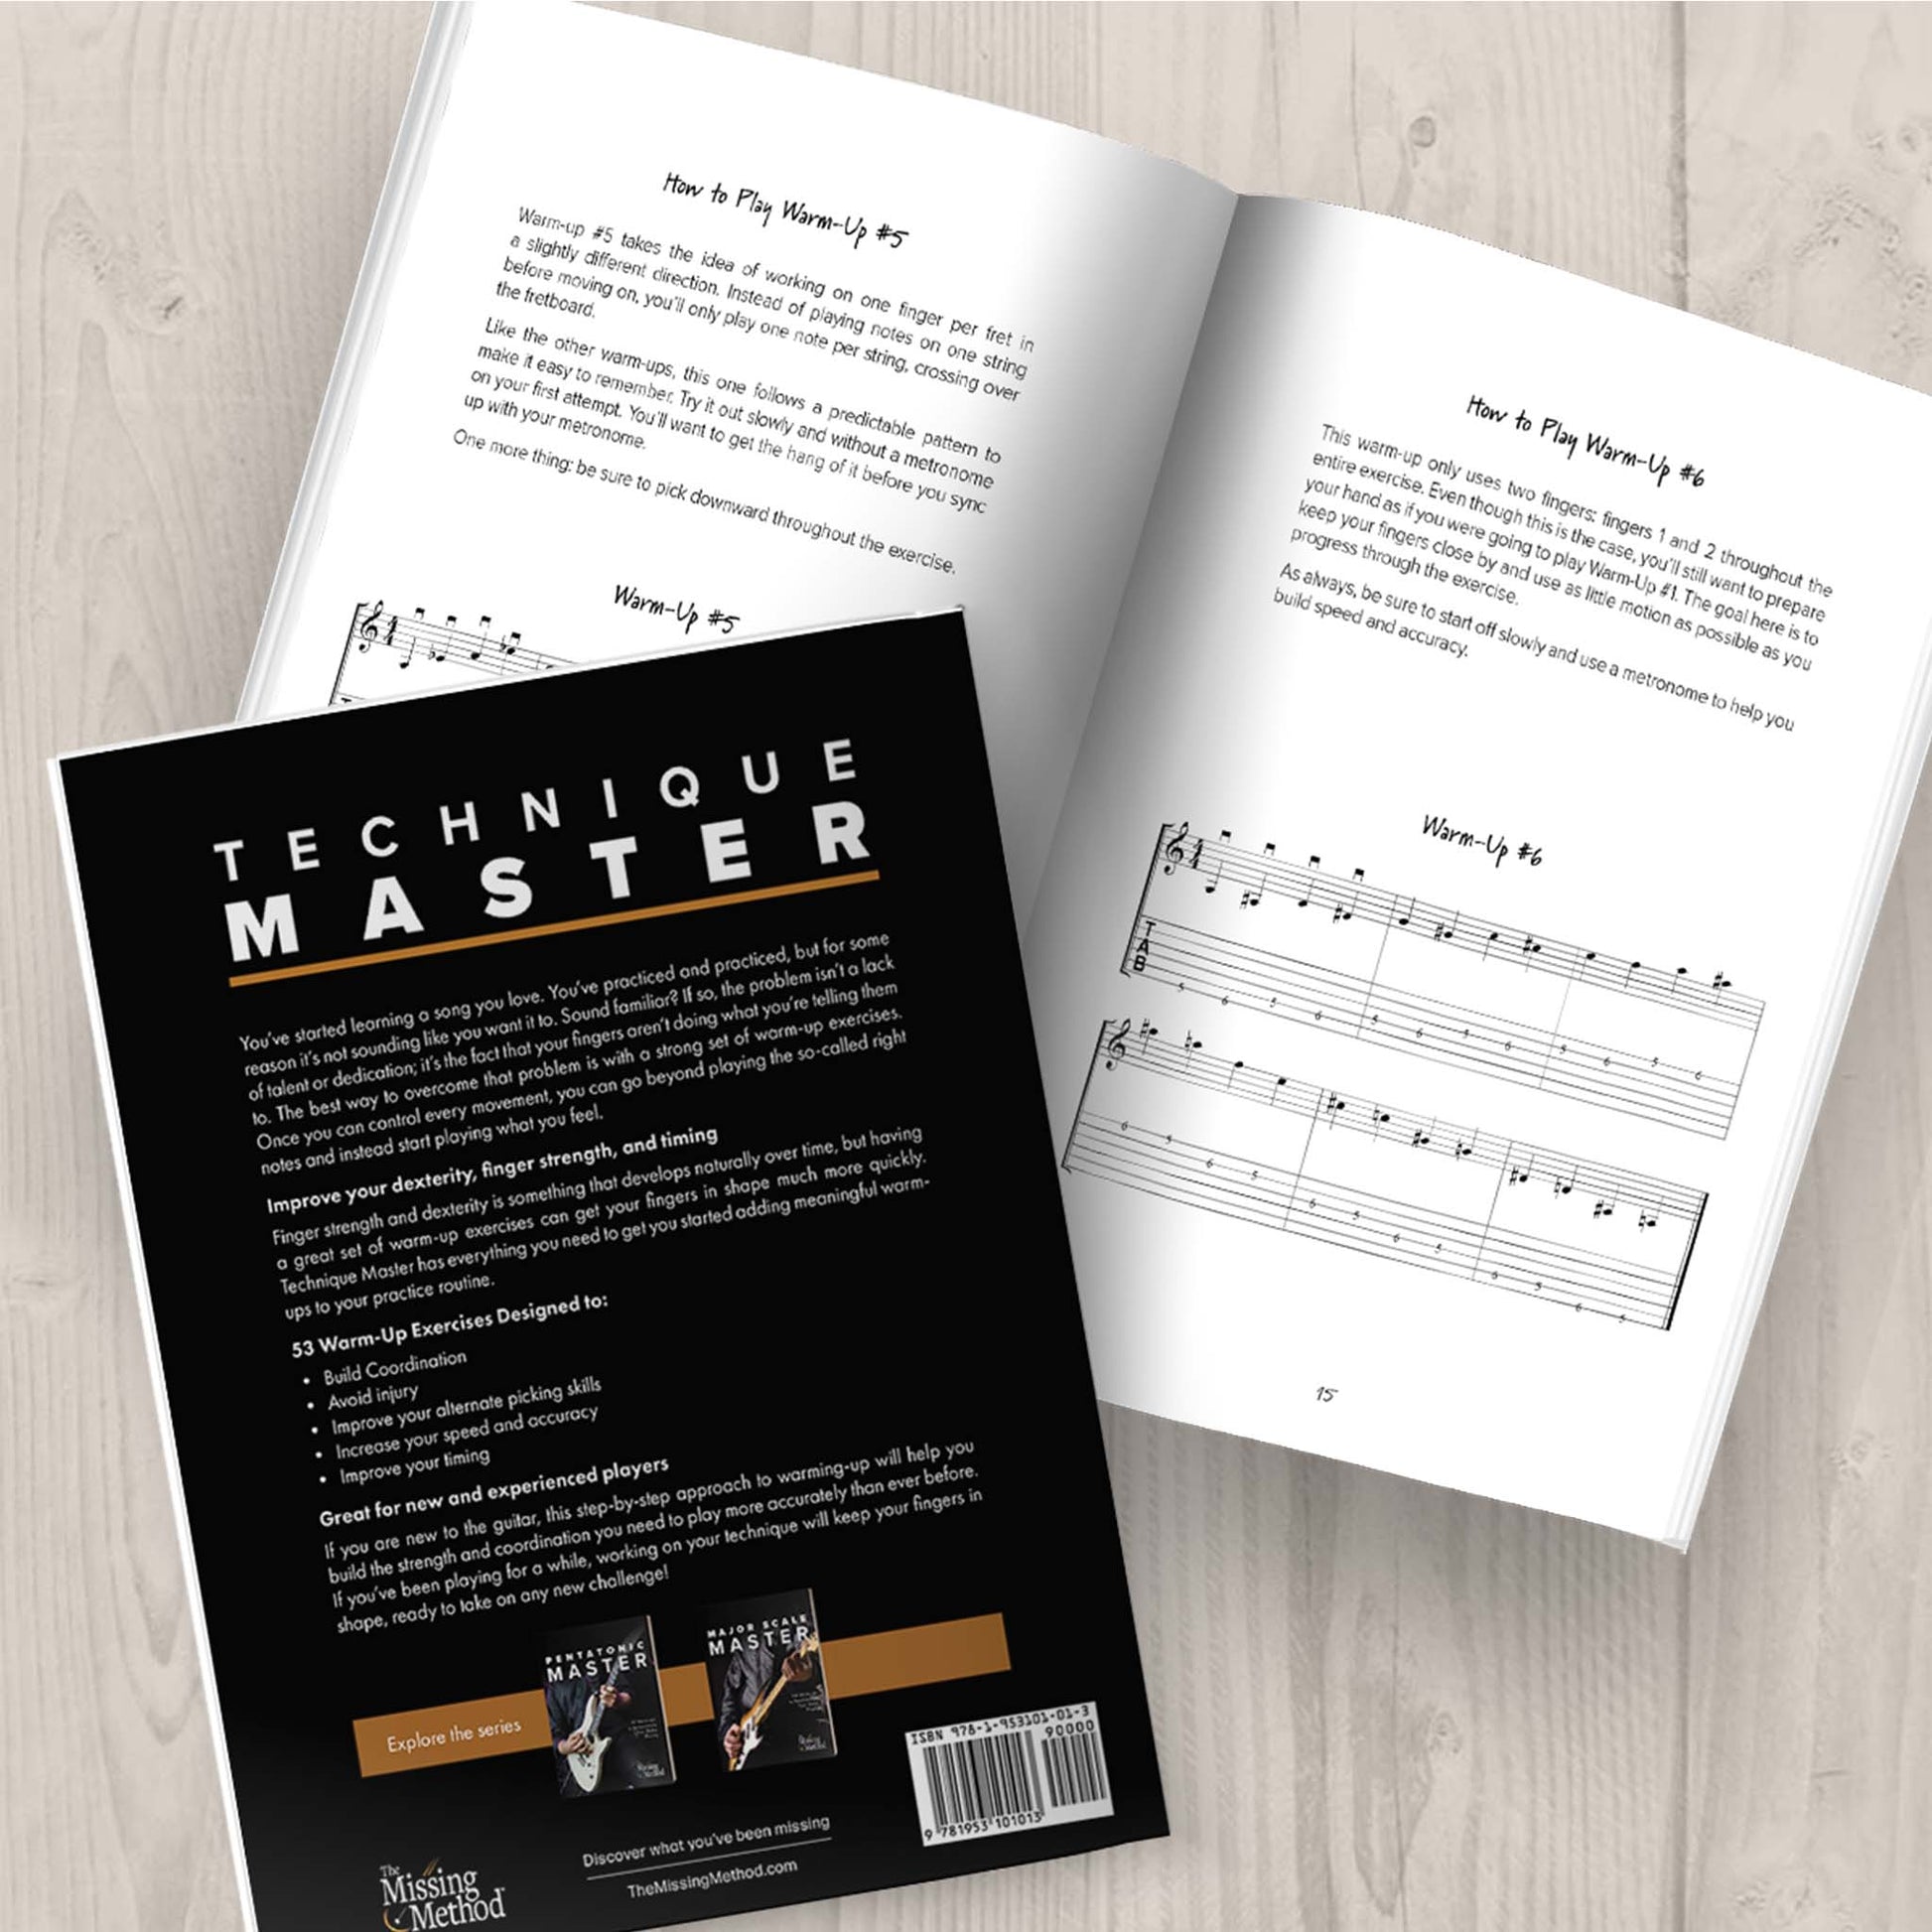 Technique Master from The Missing Method for Guitar. Image of two copies of the book on a tabletop, one open and displaying some of the first set of warm-ups. The second book closed, displaying the back cover.